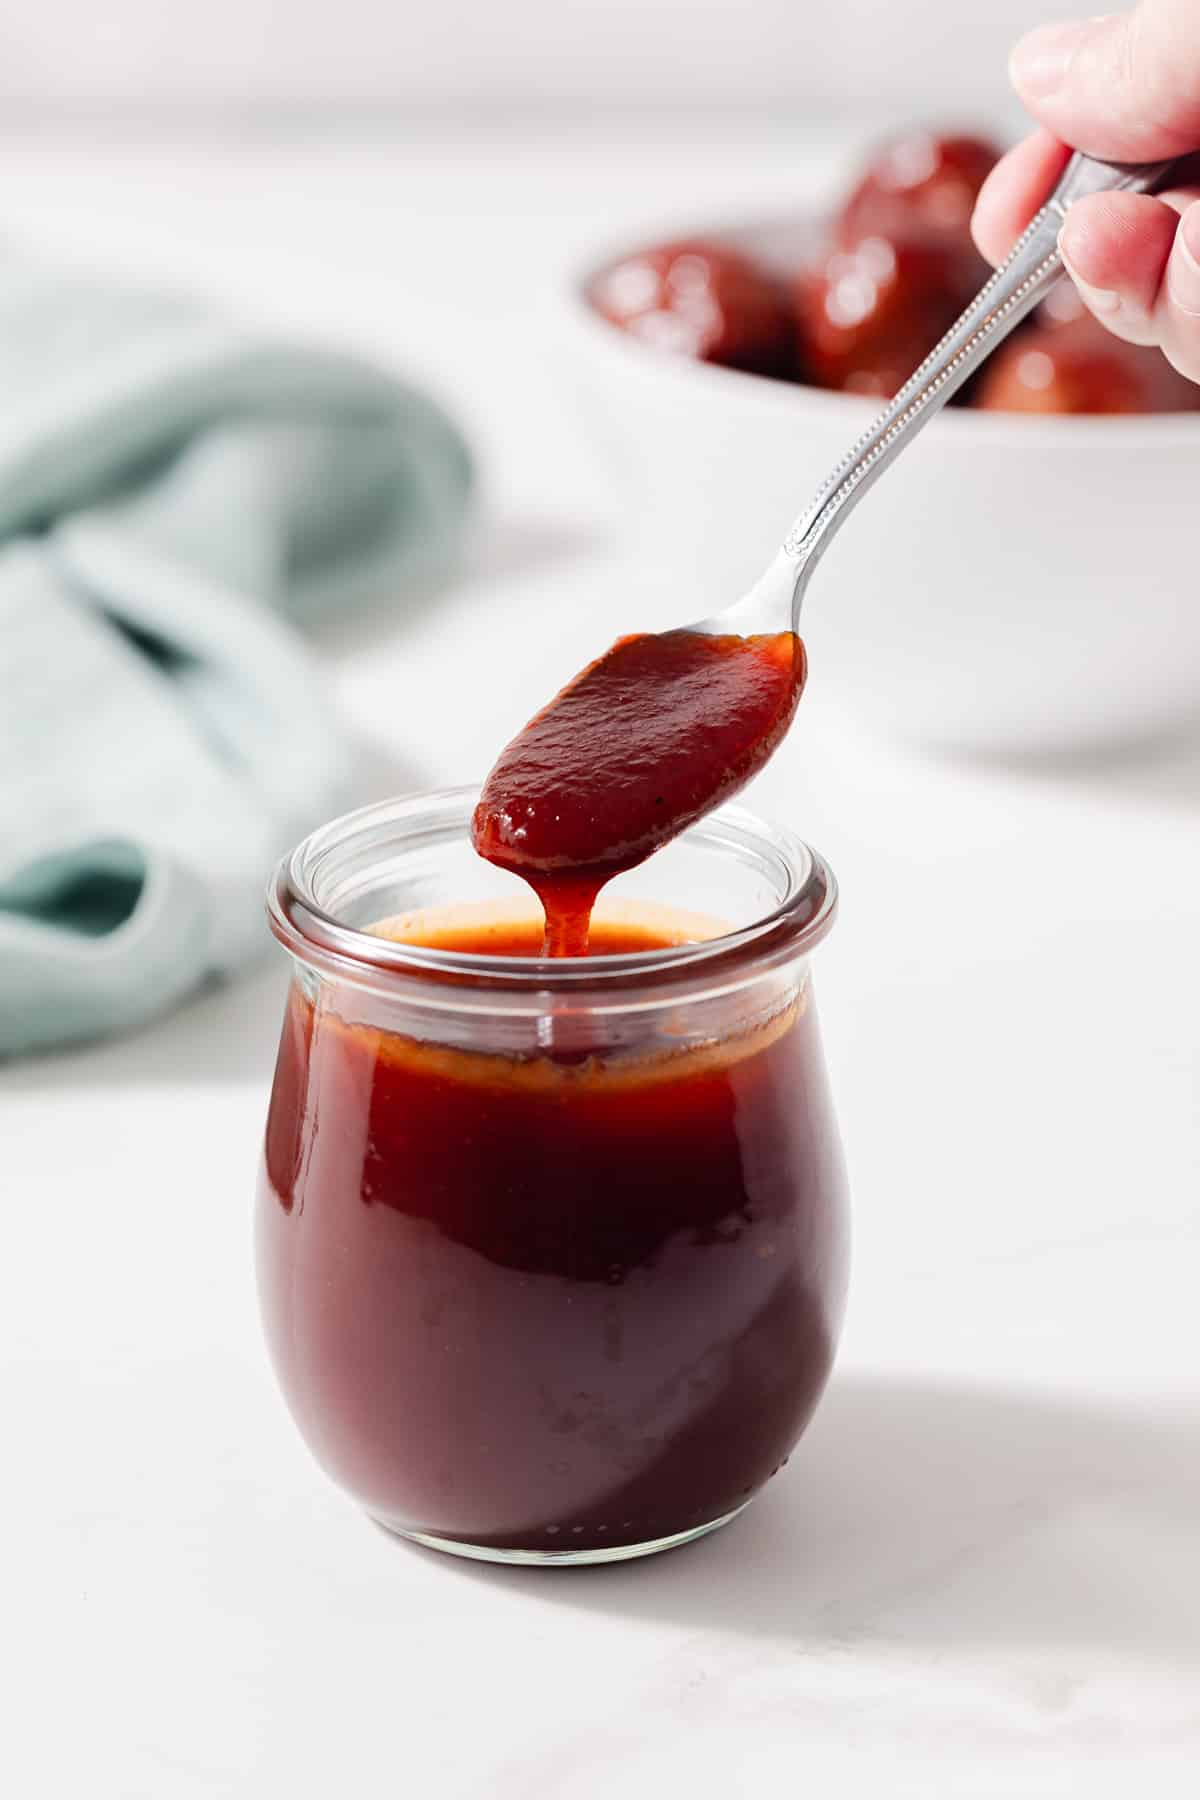 A spoon scooping meatball sauce out of a glass jar.